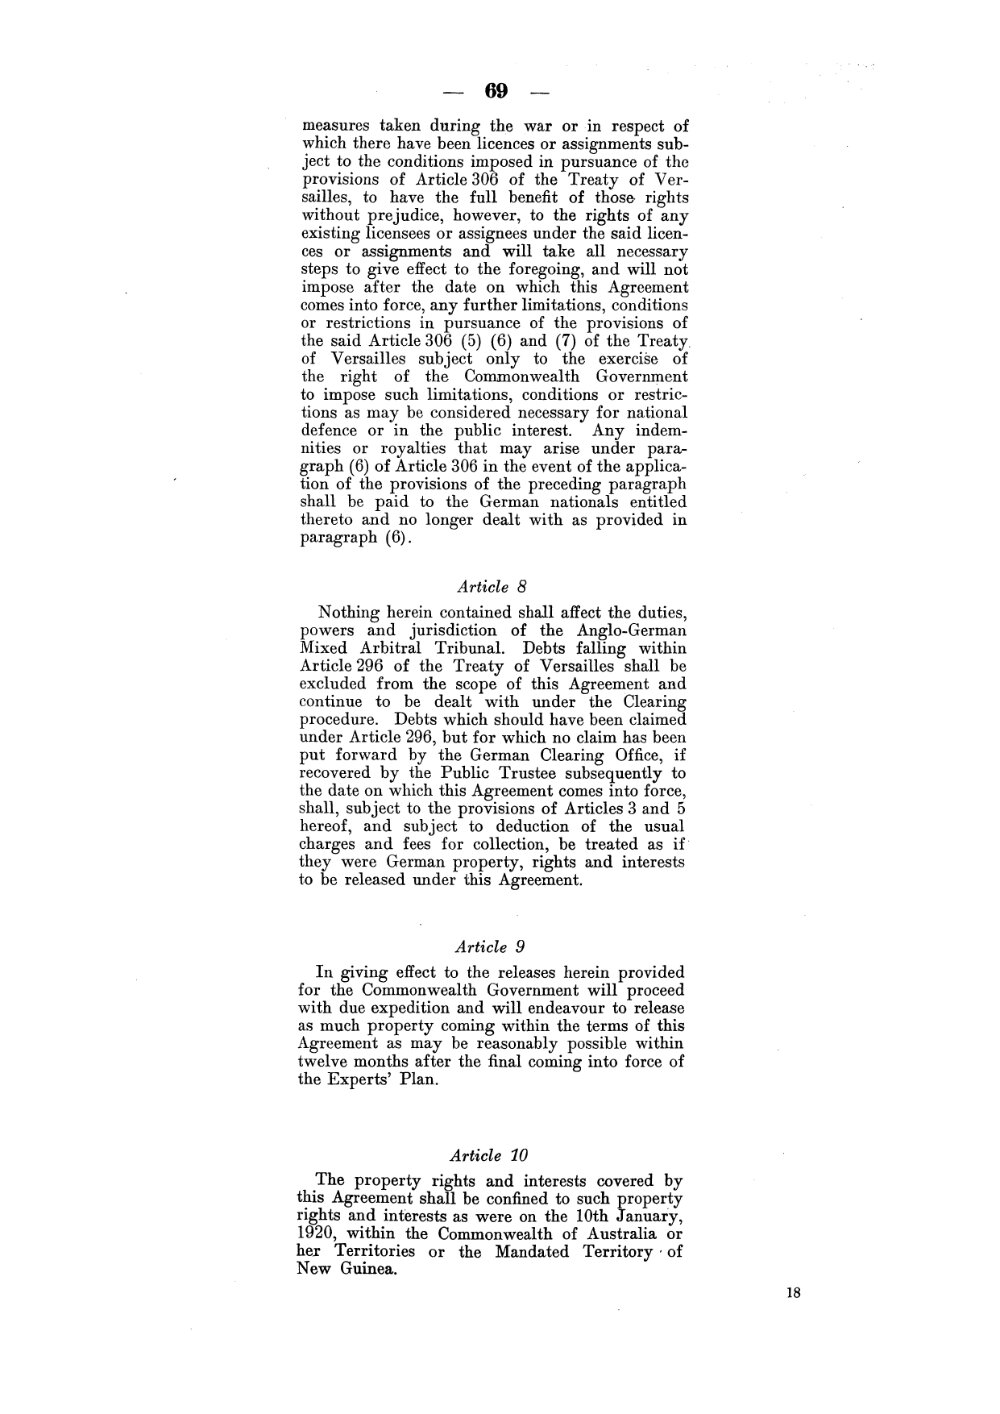 Scan of page 69